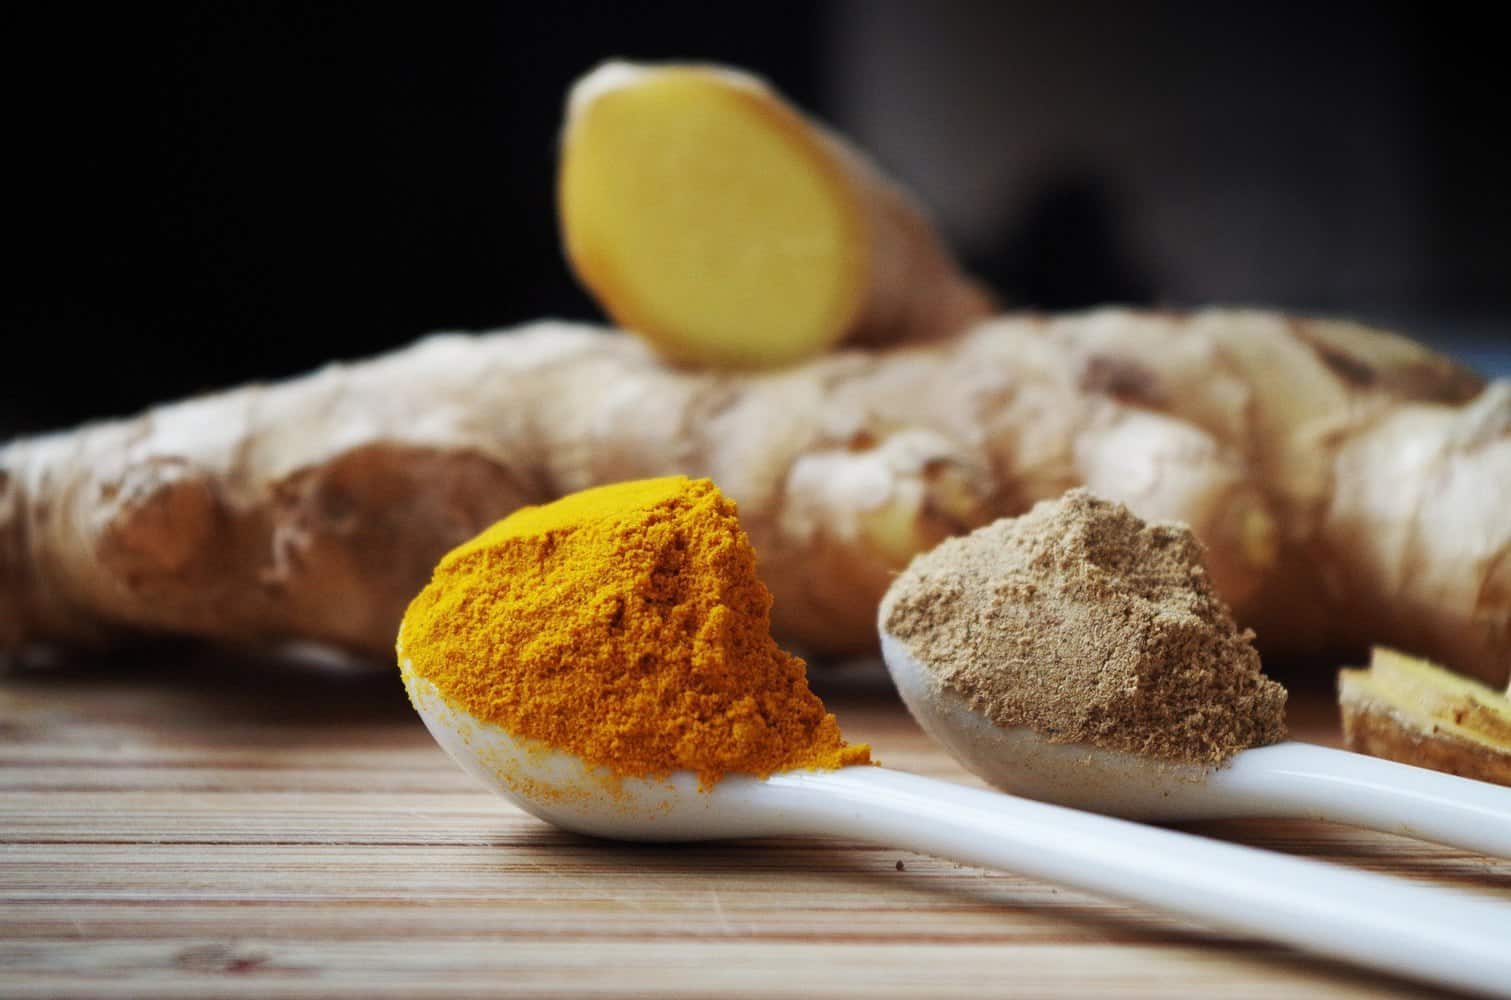 Ginger root and powder with turmeric powder.